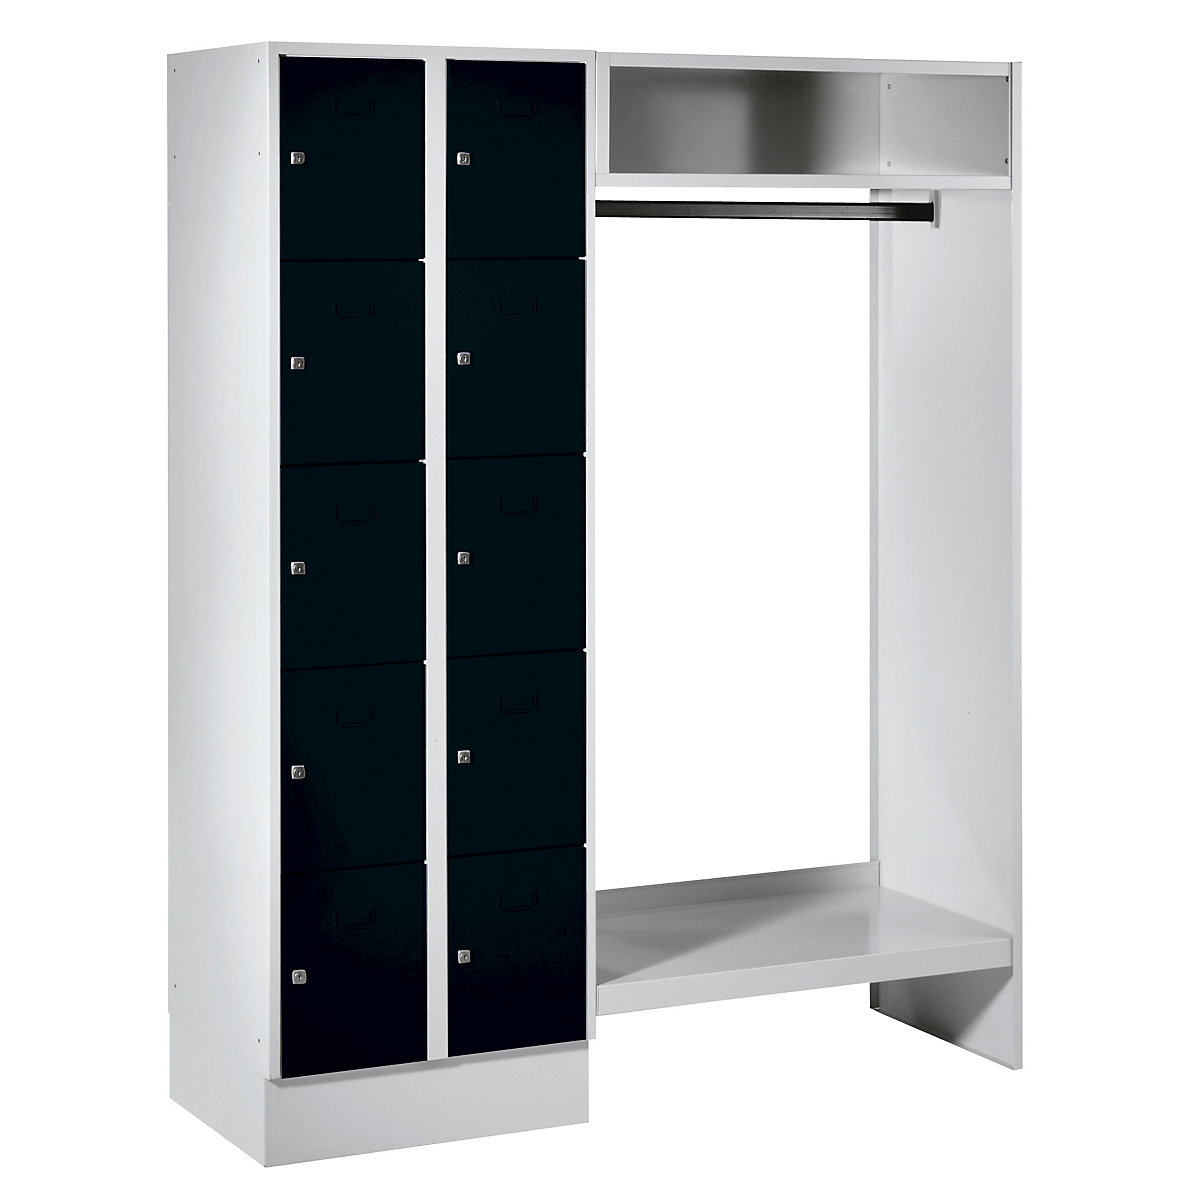 Cloakroom locker system – Wolf, 10 compartments on left, 10 coat hangers, overall width 1470 mm, compartment width 298 mm, jet black/light grey-8